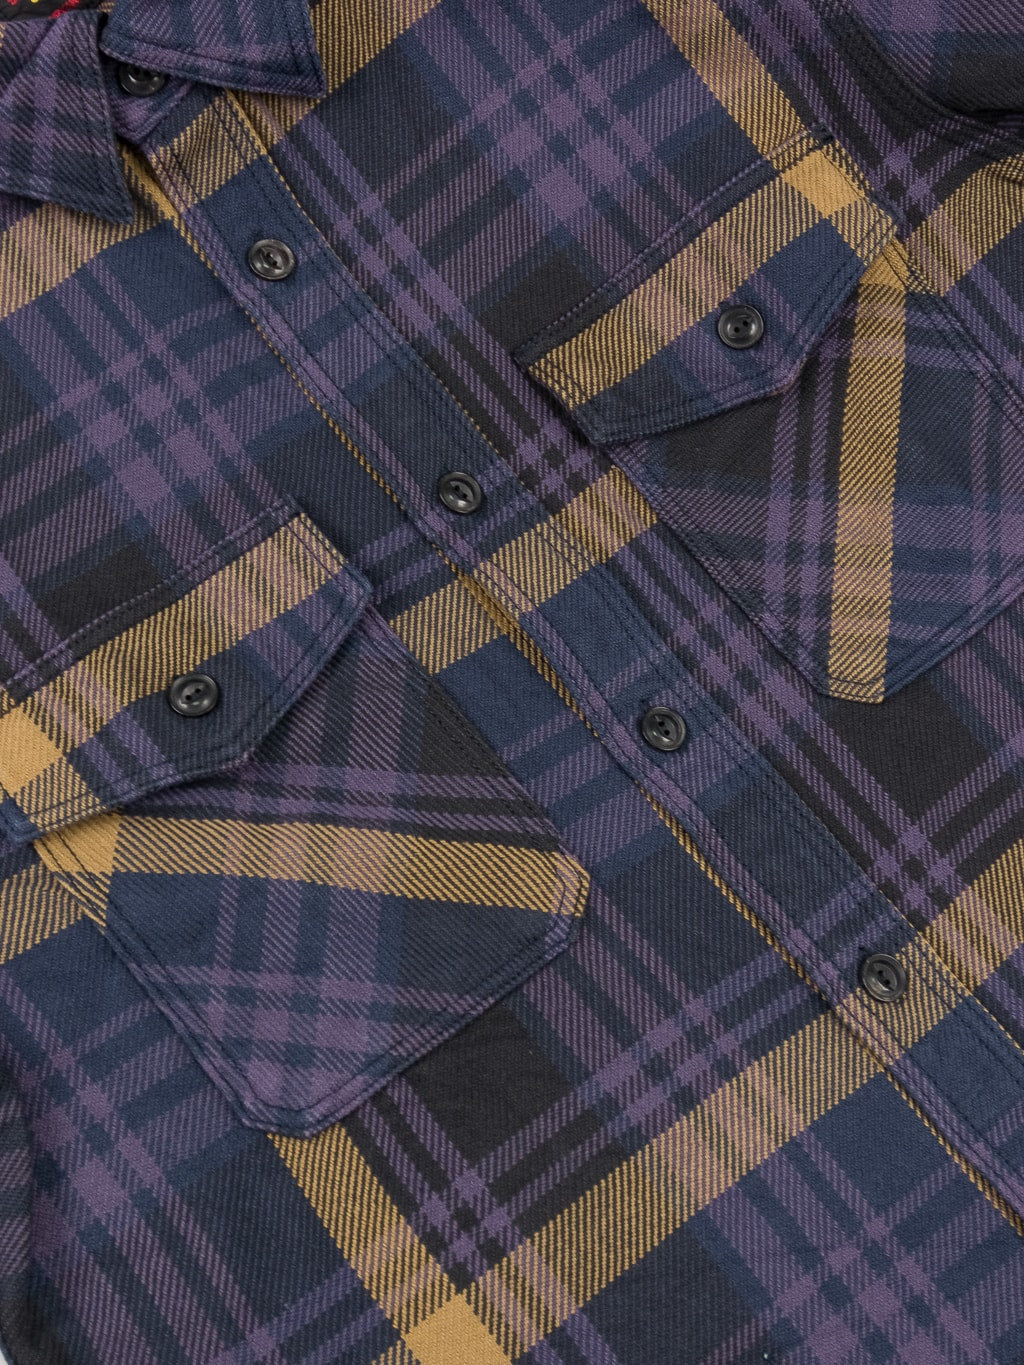 ues extra heavy selvedge flannel shirt navy chest pockets detail